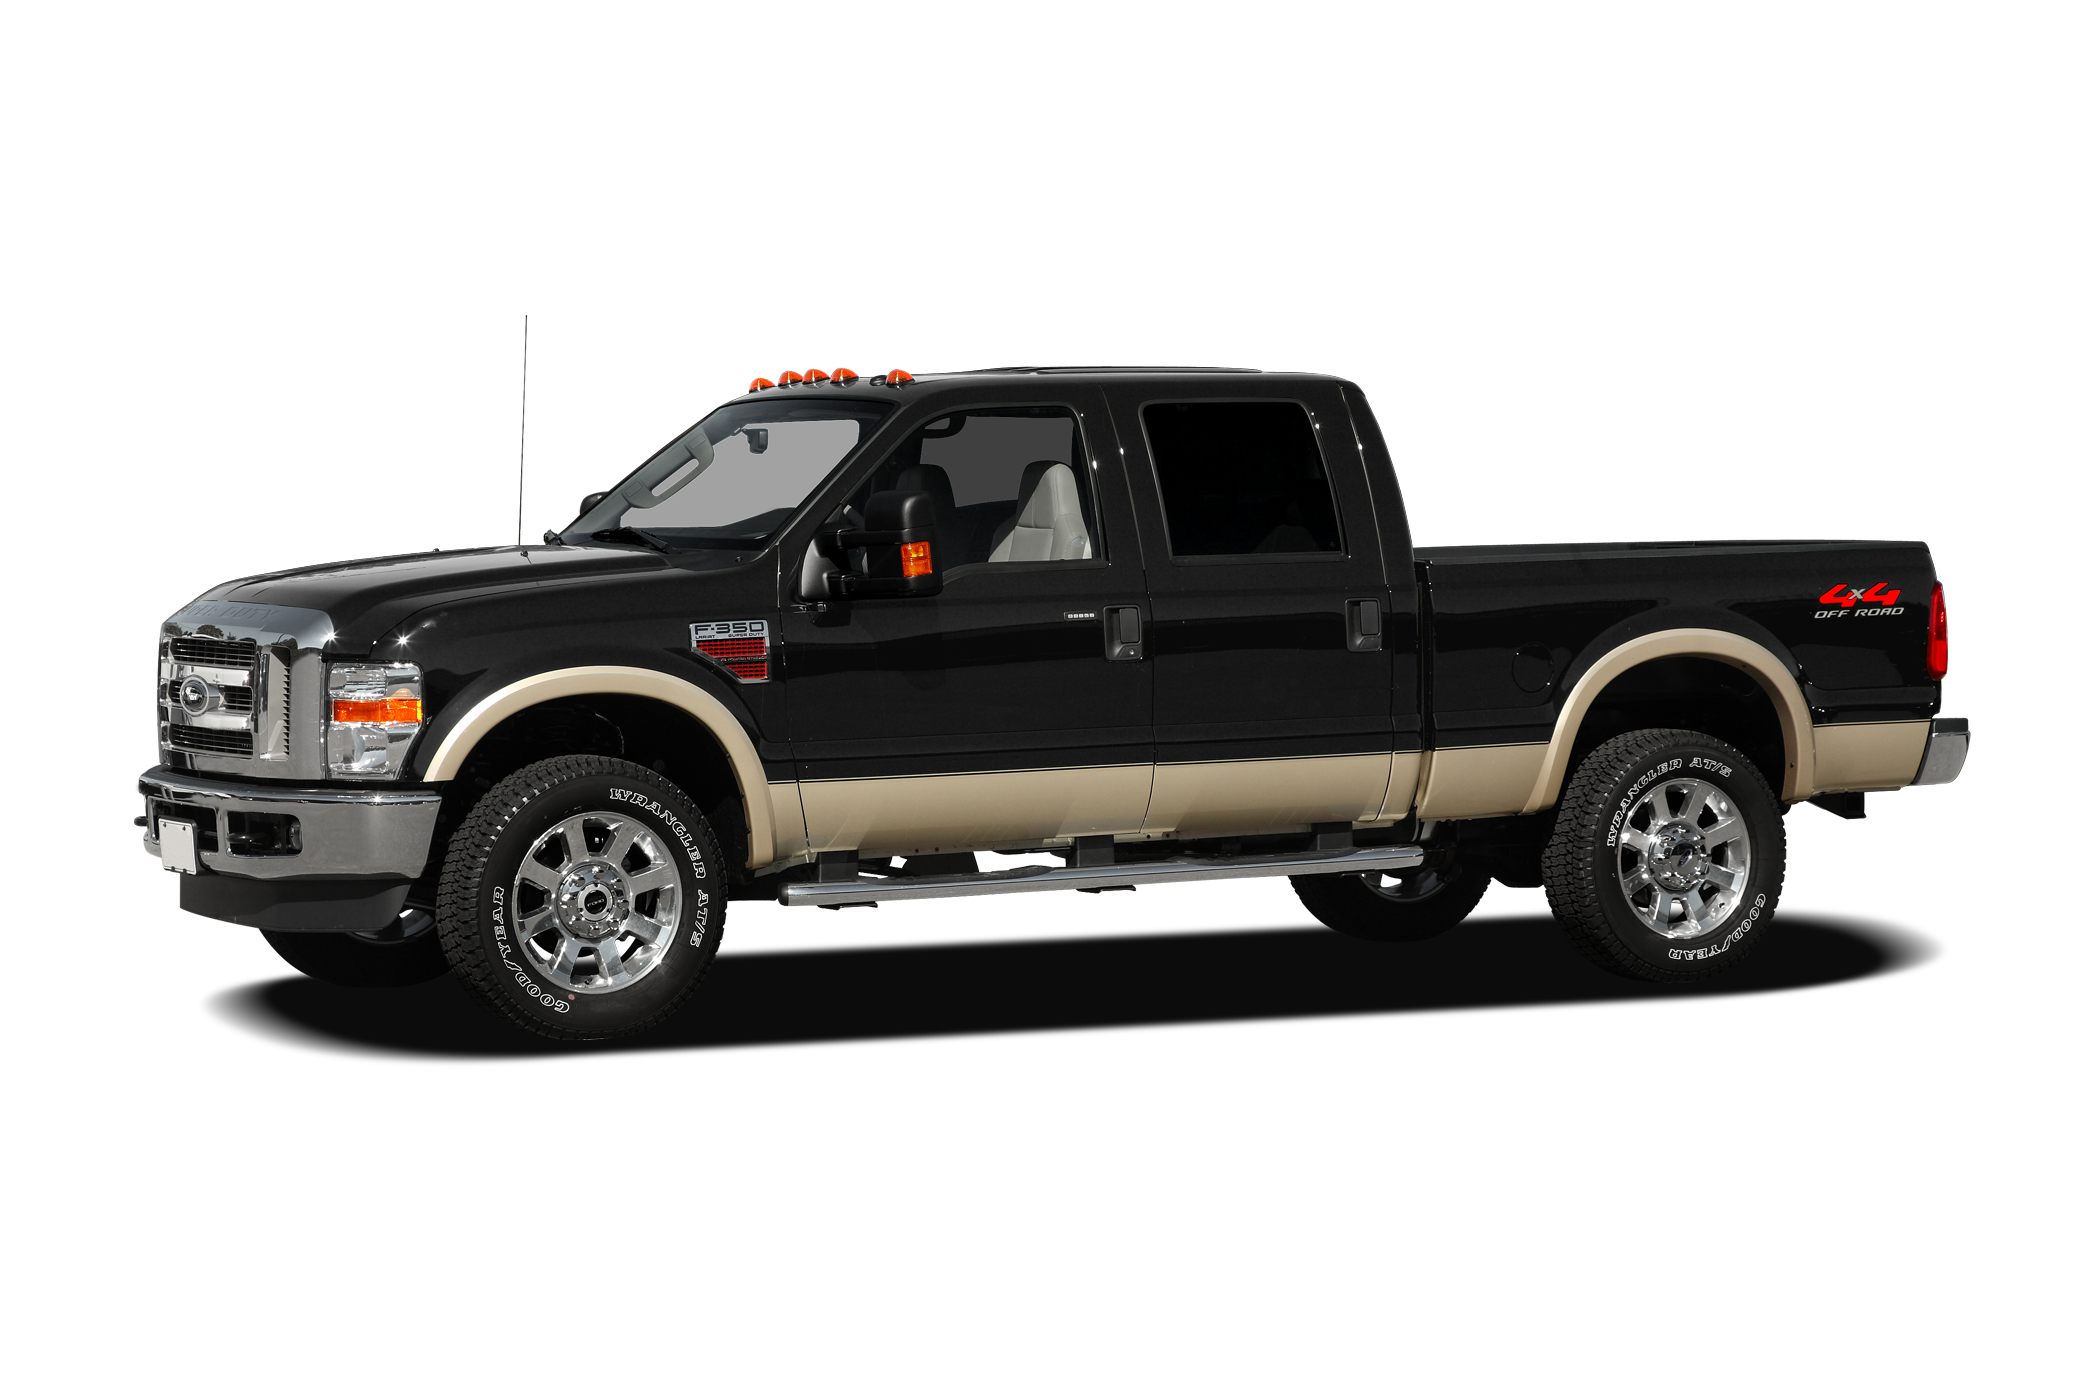 2009 Ford F 350 Lariat 4x2 Sd Crew Cab 172 In Wb Srw Pictures